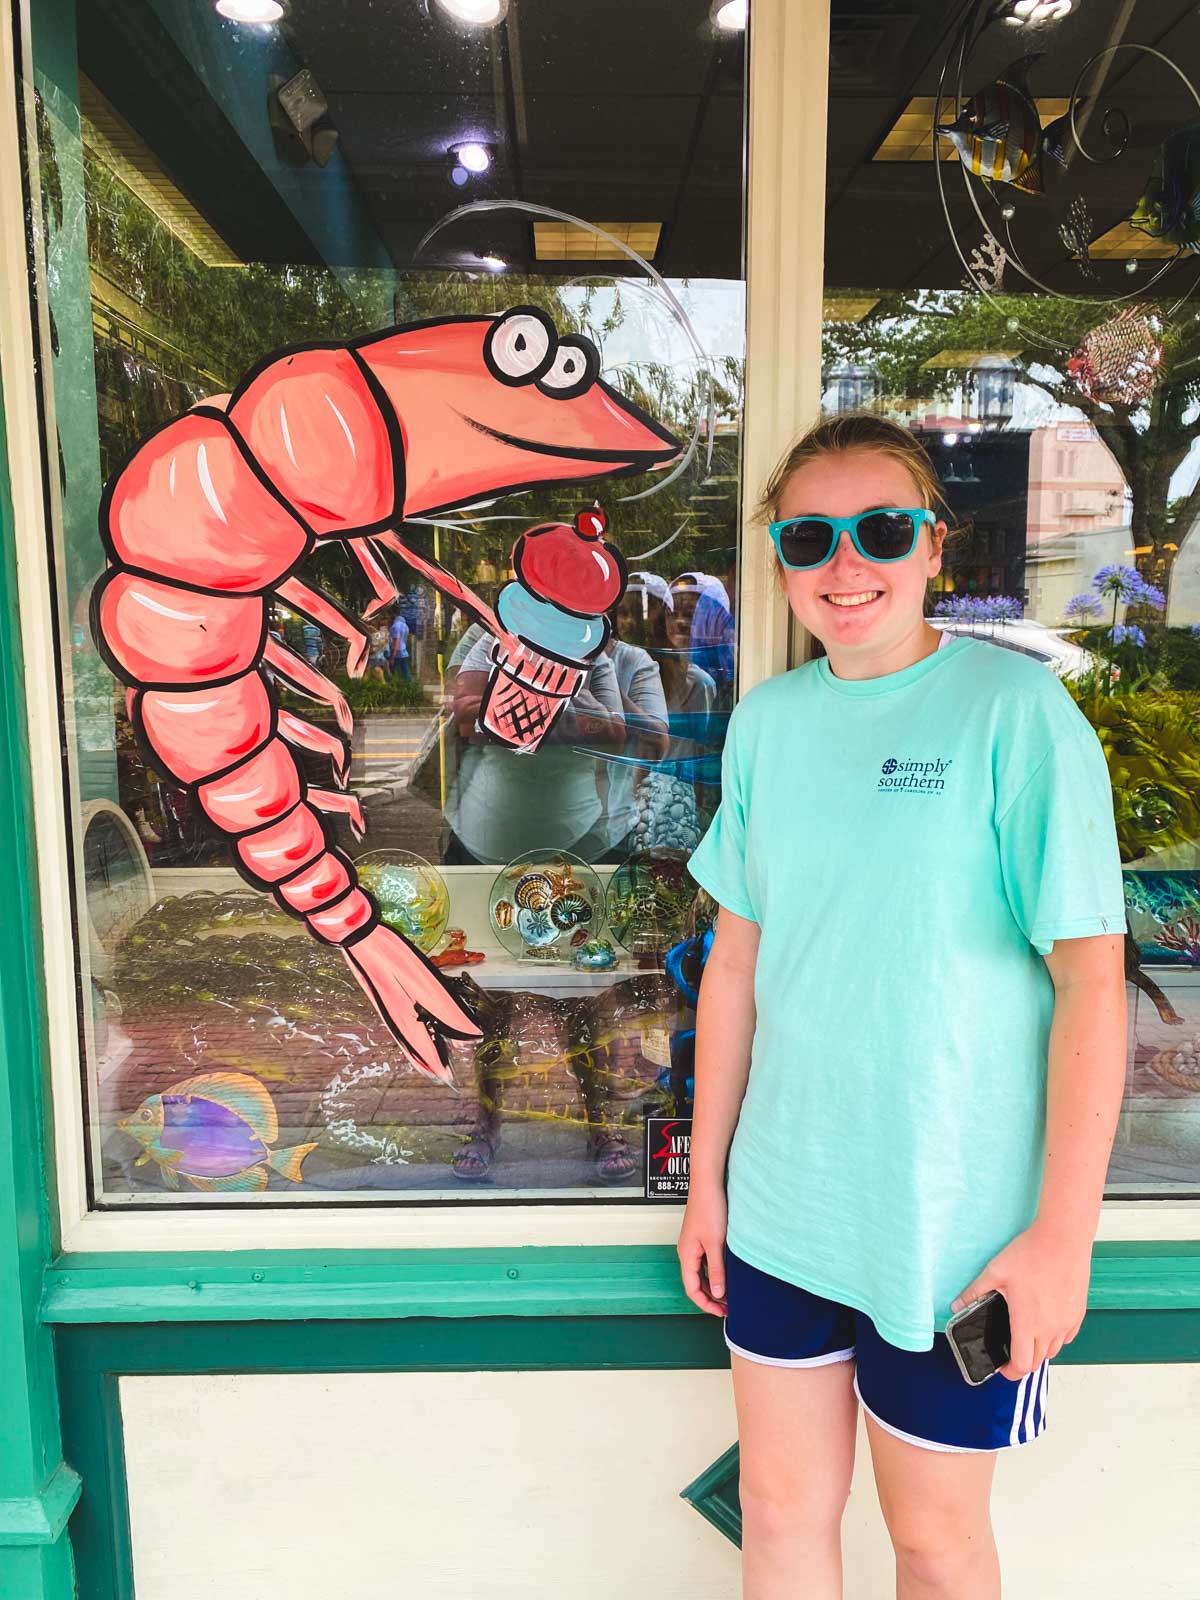 A young girl poses next to a large shrimp decoration outside a store in Amelia Island.